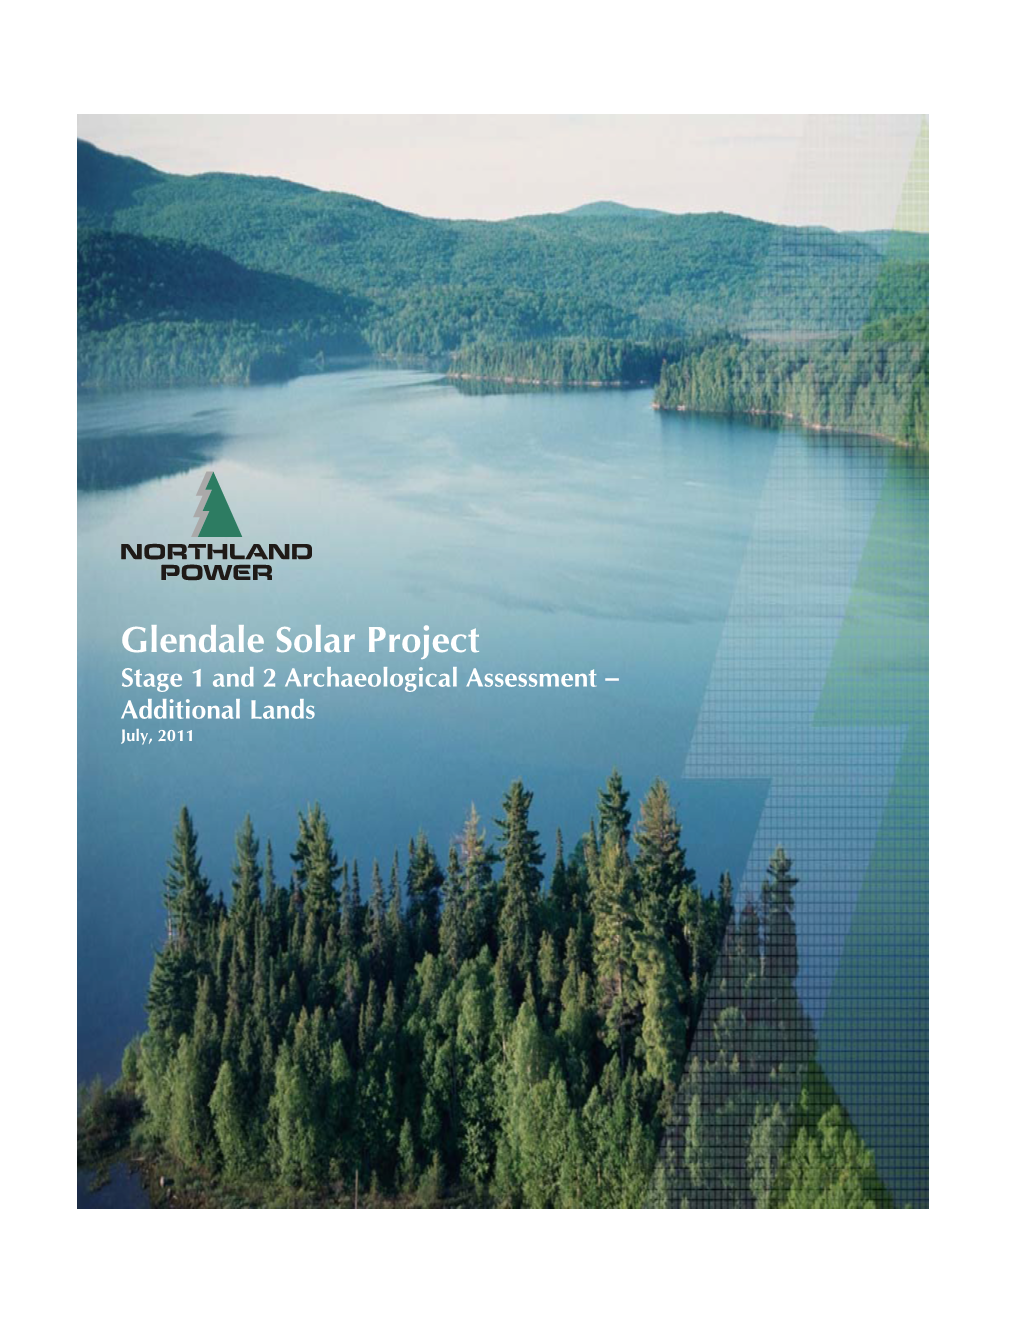 Glendale Solar Project Stage 1 and 2 Archaeological Assessment – Additional Lands July, 2011